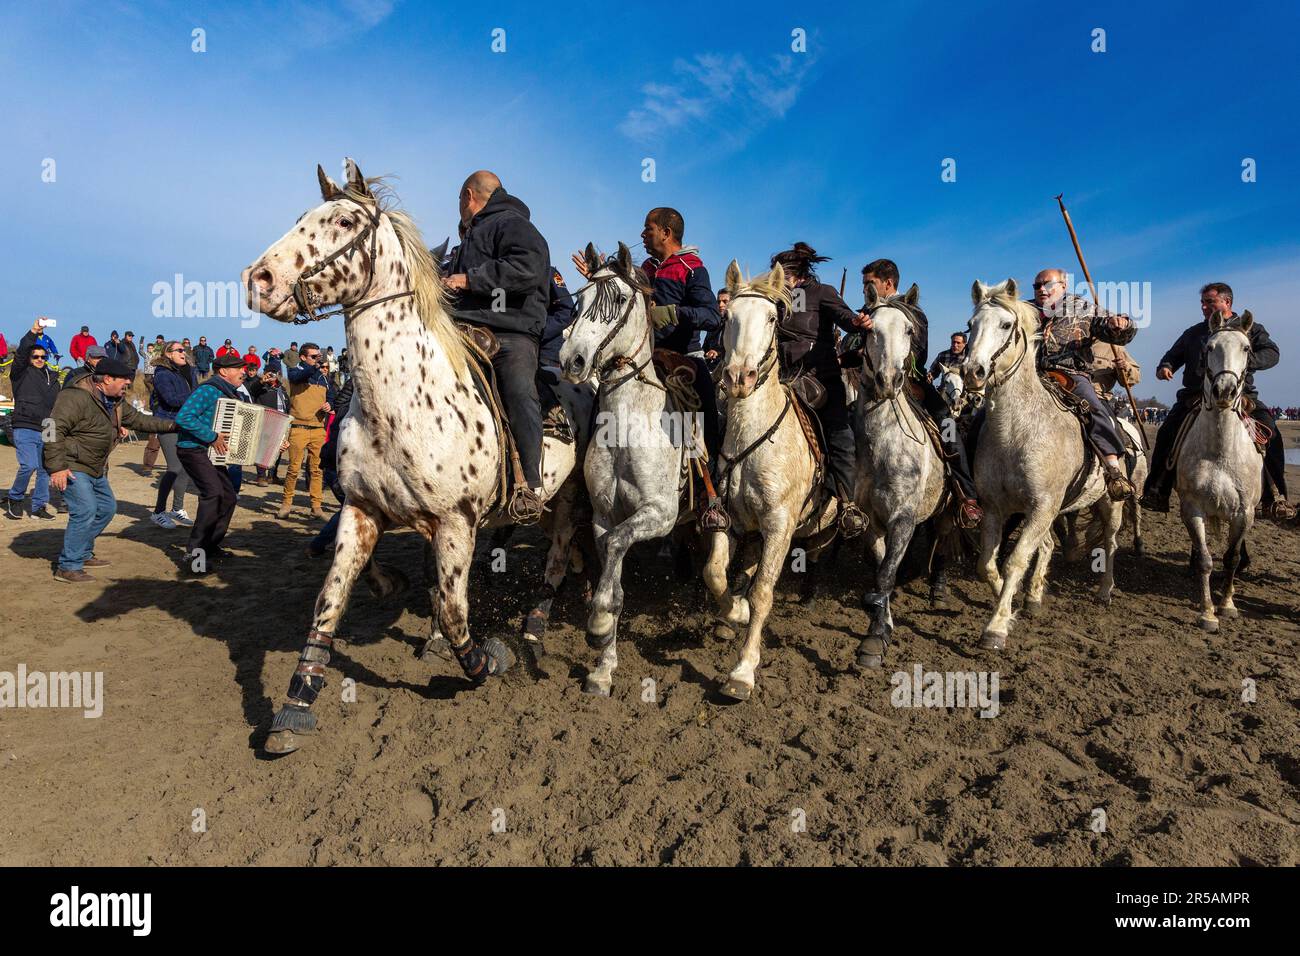 Abrivado, historical reenactment in the Camargue, France, Europe Stock Photo